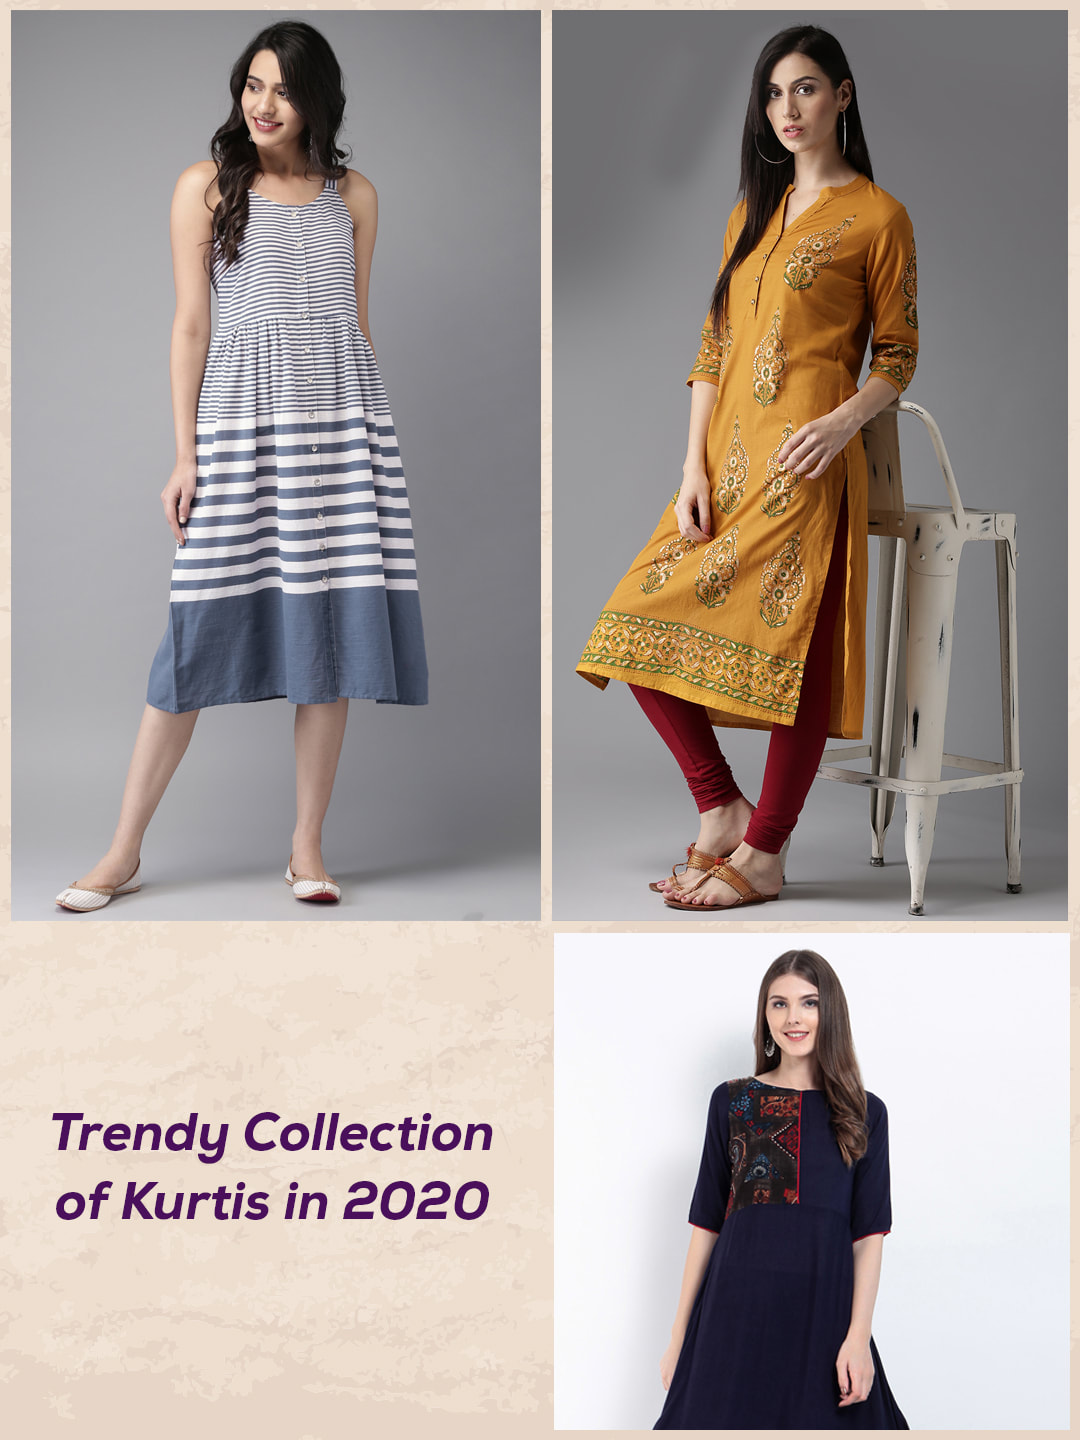 Trendy collection of Kurtis in 2020